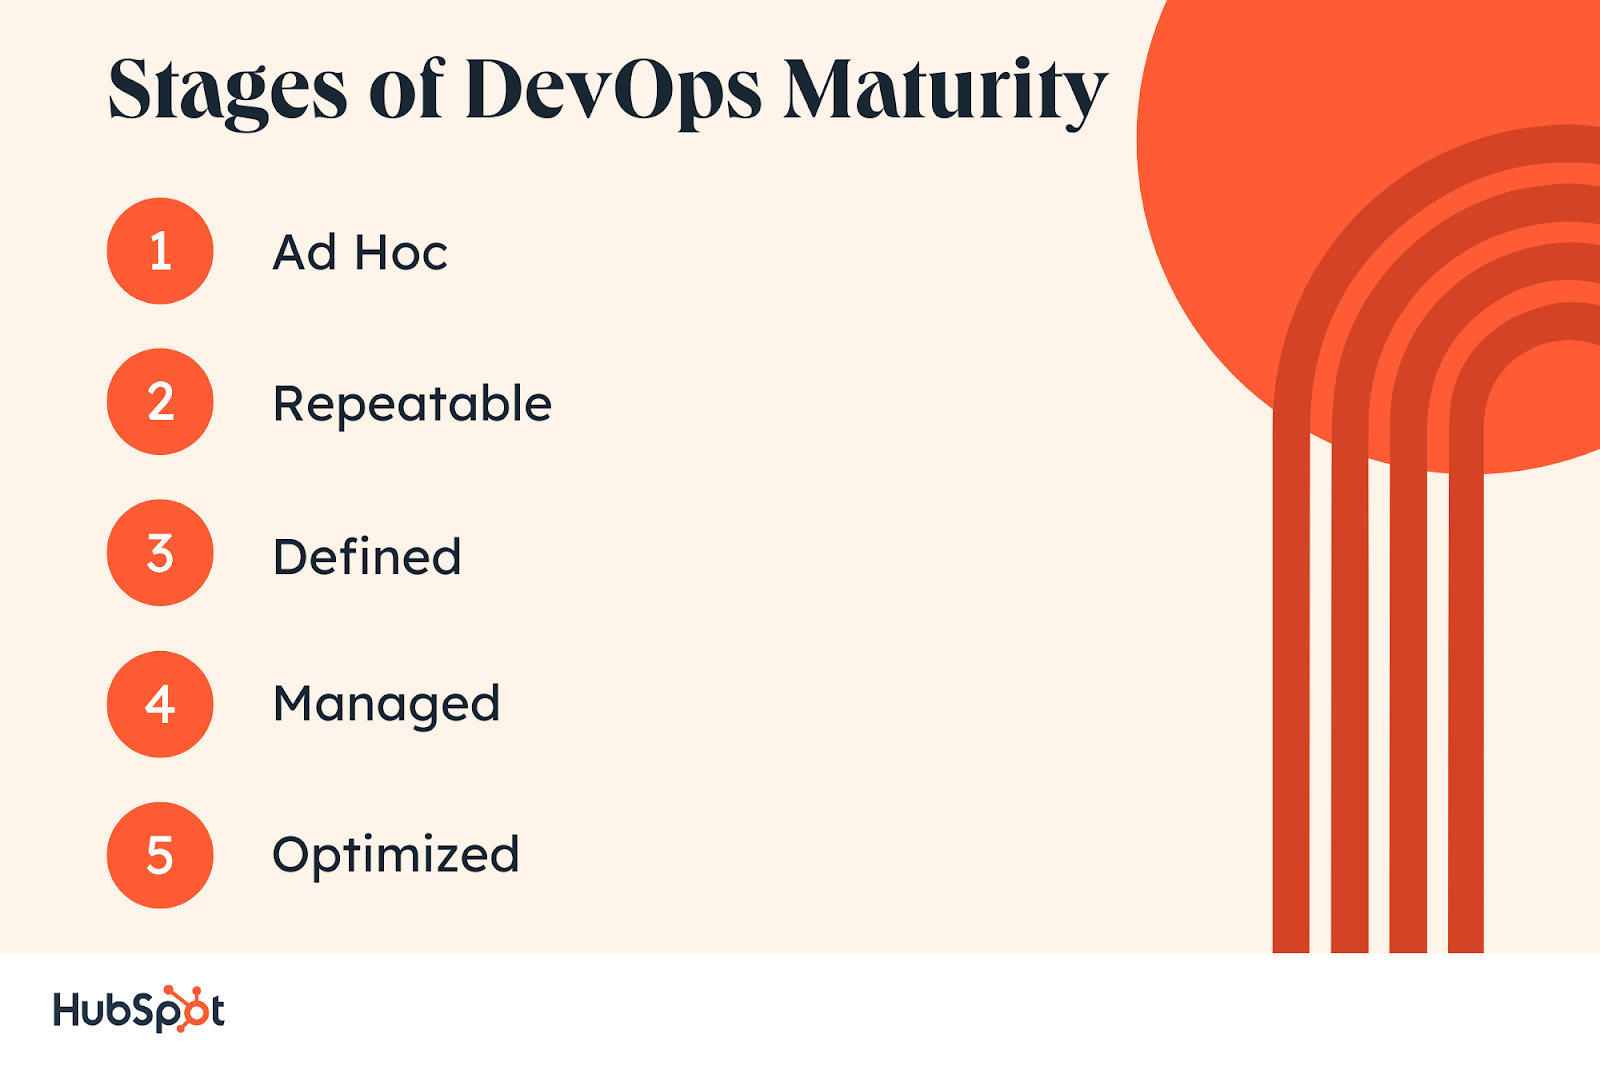 DevOps Maturity Metrics. Deployment Frequency. Change Failure Rate. Time to Restore Service. Cycle Time. Mean Time to Recovery. Code Coverage. Customer Satisfaction